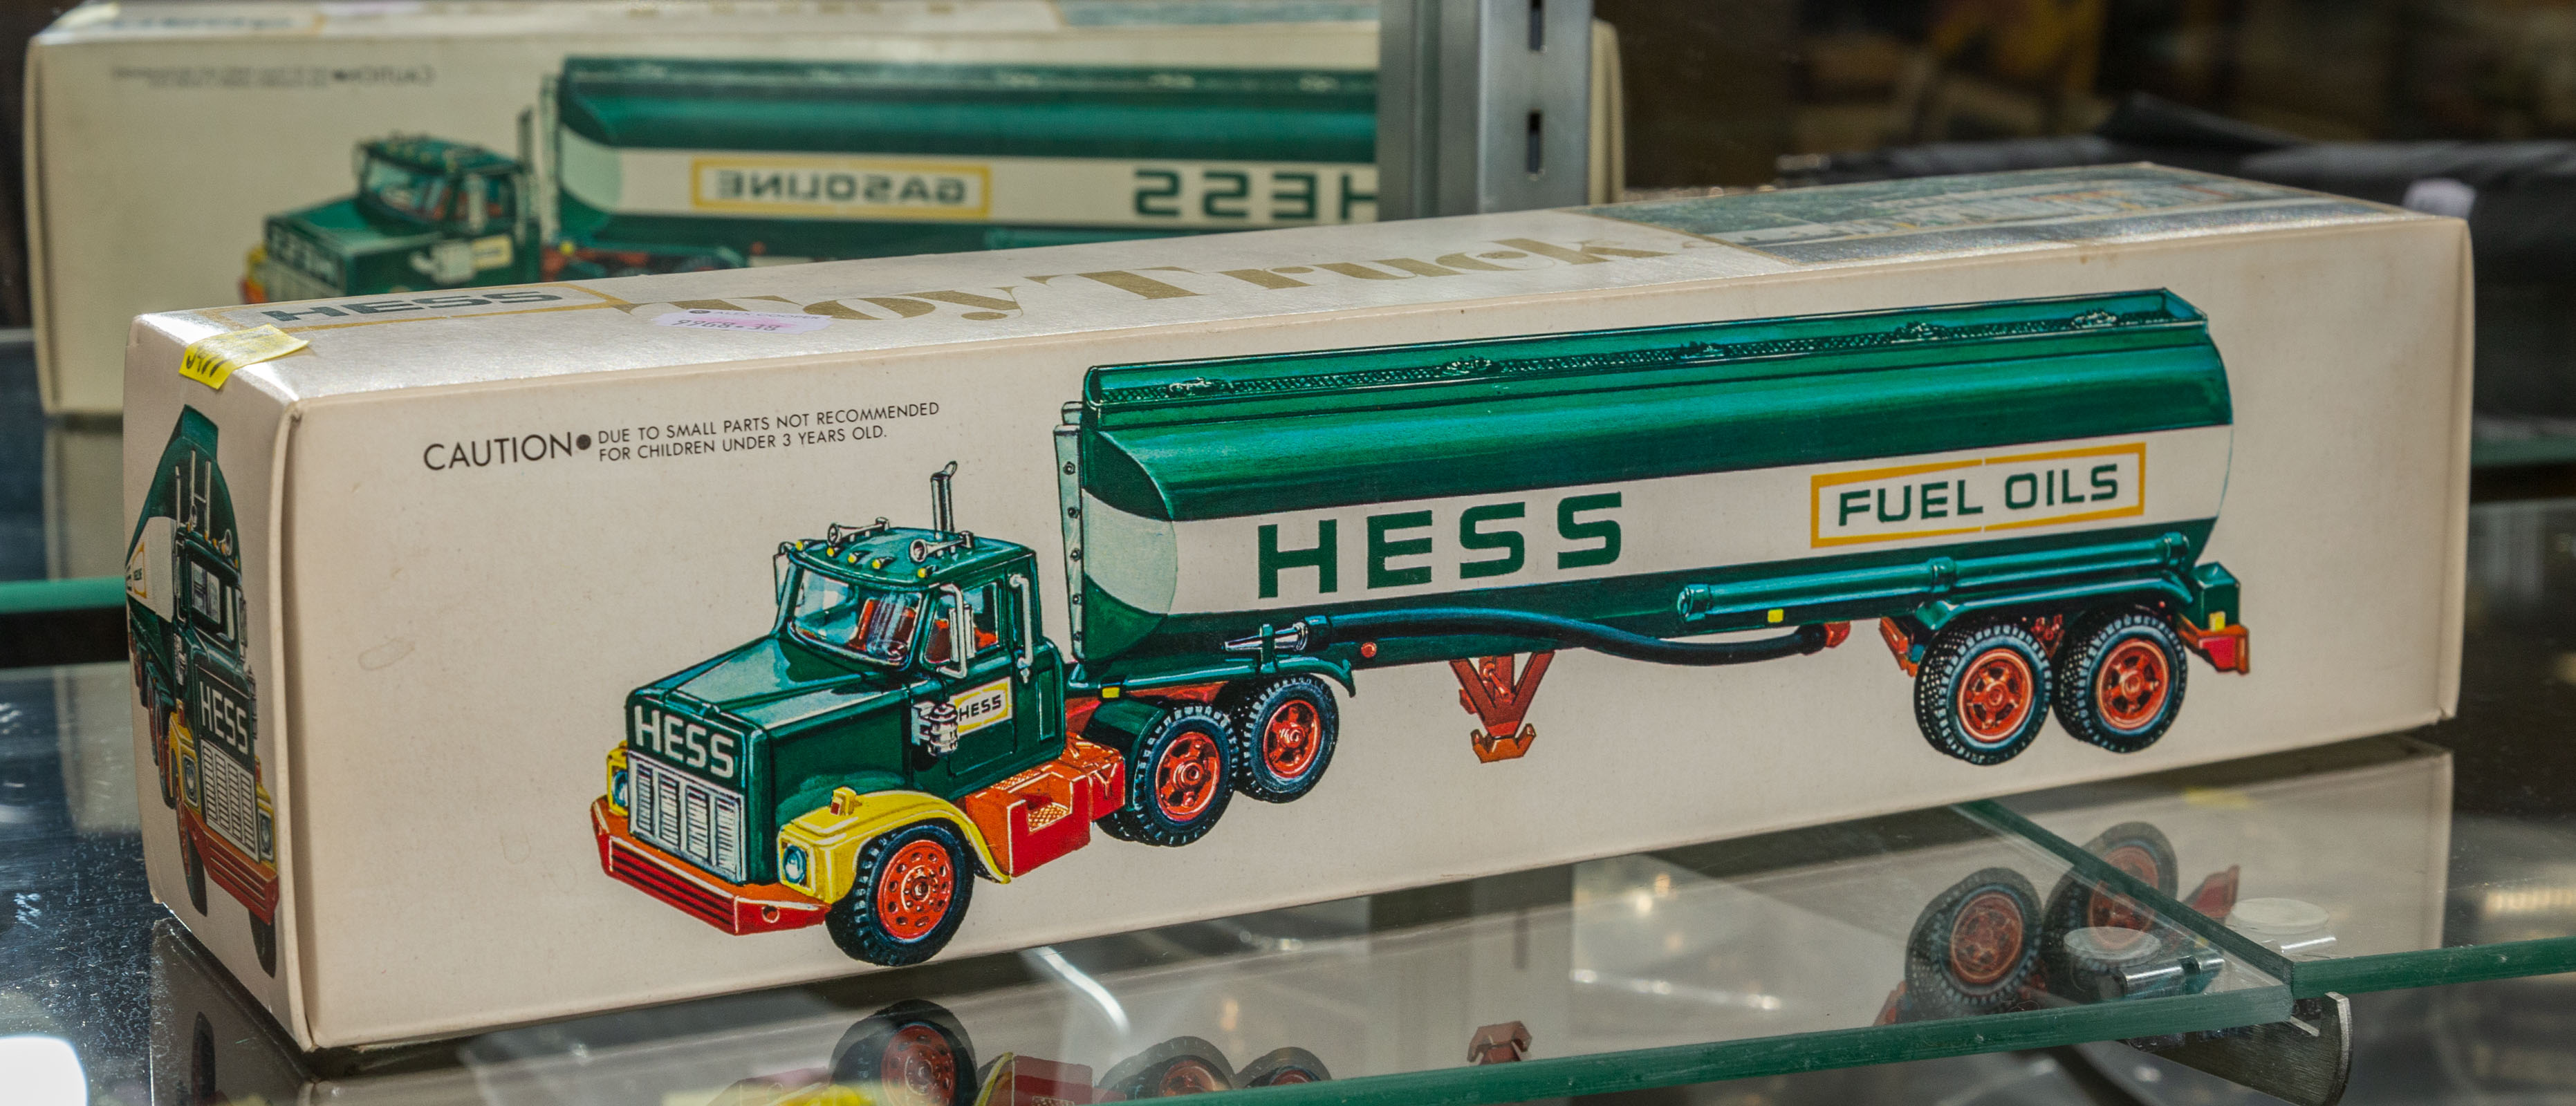 EARLY HESS TANKER TRUCK 1977, in the